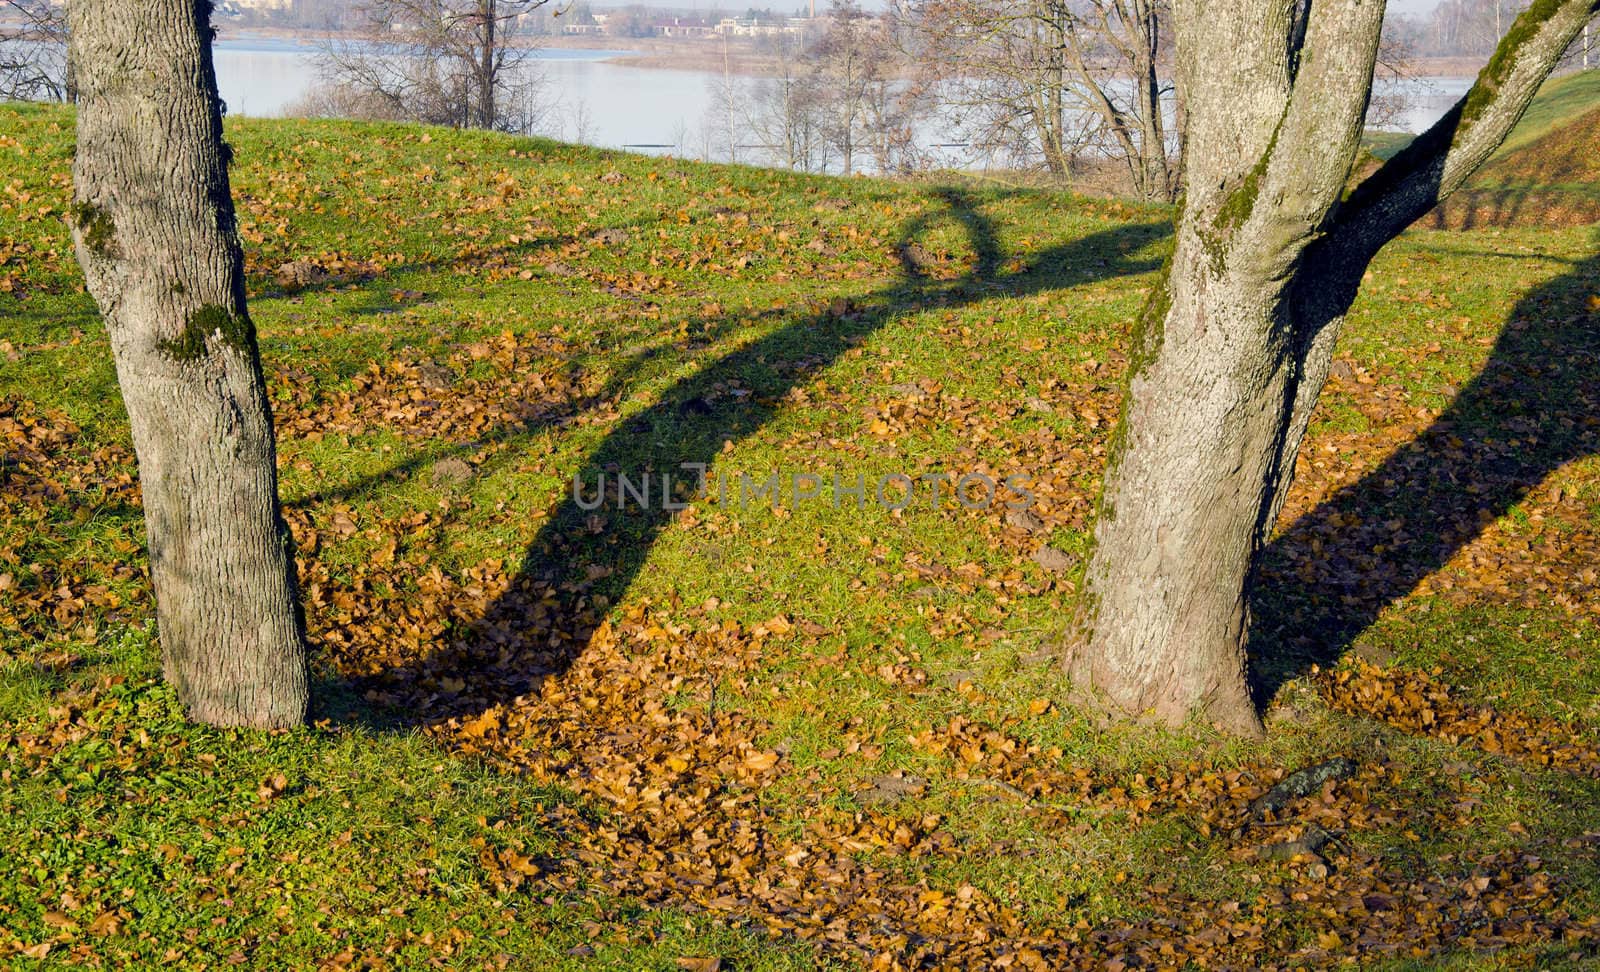 Lime tree trunks and fallen leaves in autumn. Lake landscape background.